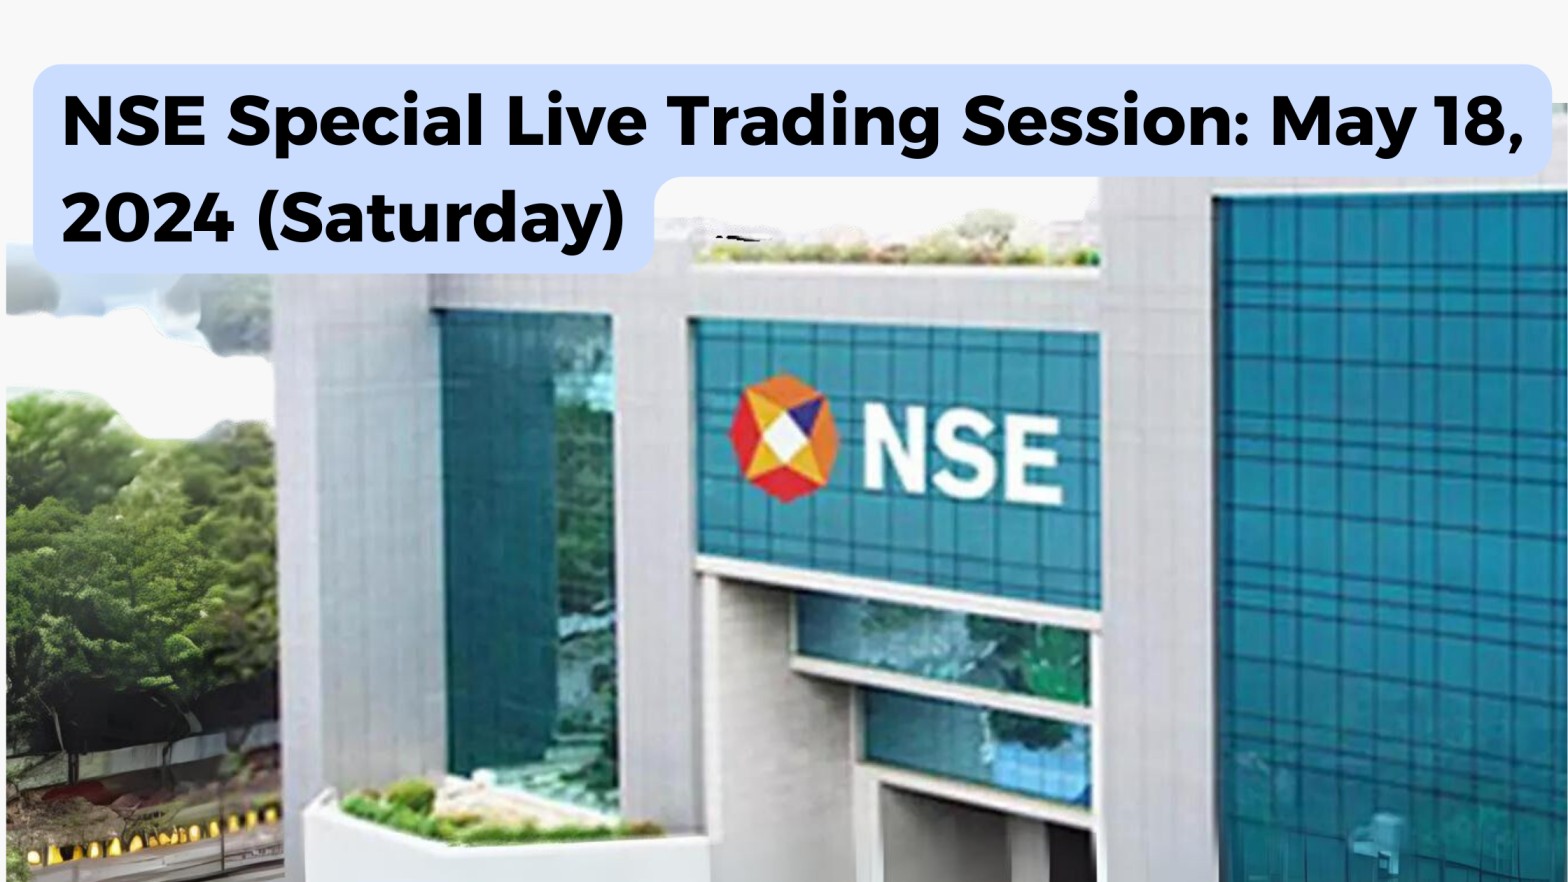 NSE, BSE Special Live Trading Session: May 18, 2024 (Saturday)